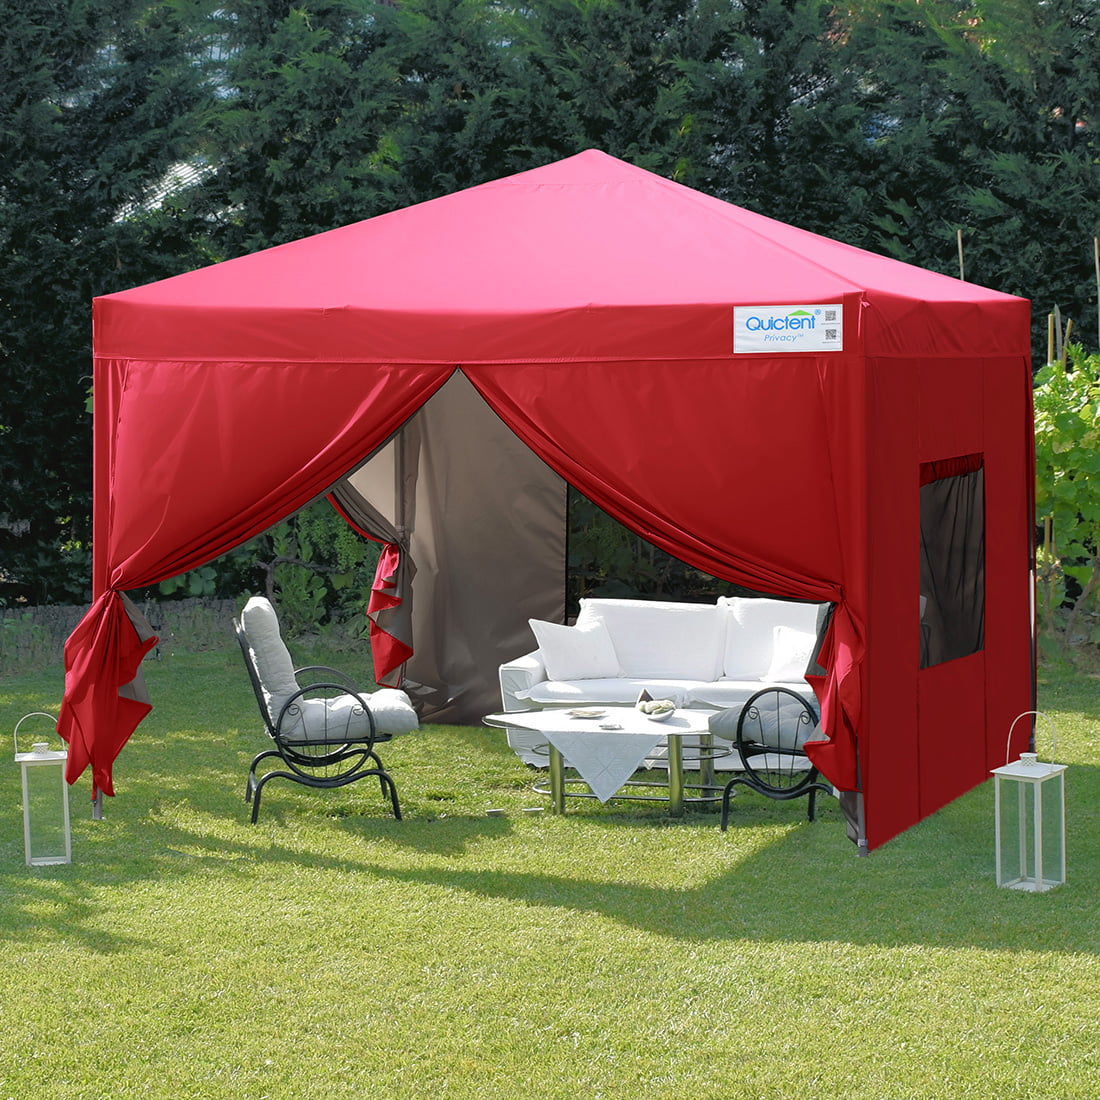 Upgraded Quictent Privacy 8x8 Easy Pop Up Canopy Tent Party Tent Gazebo